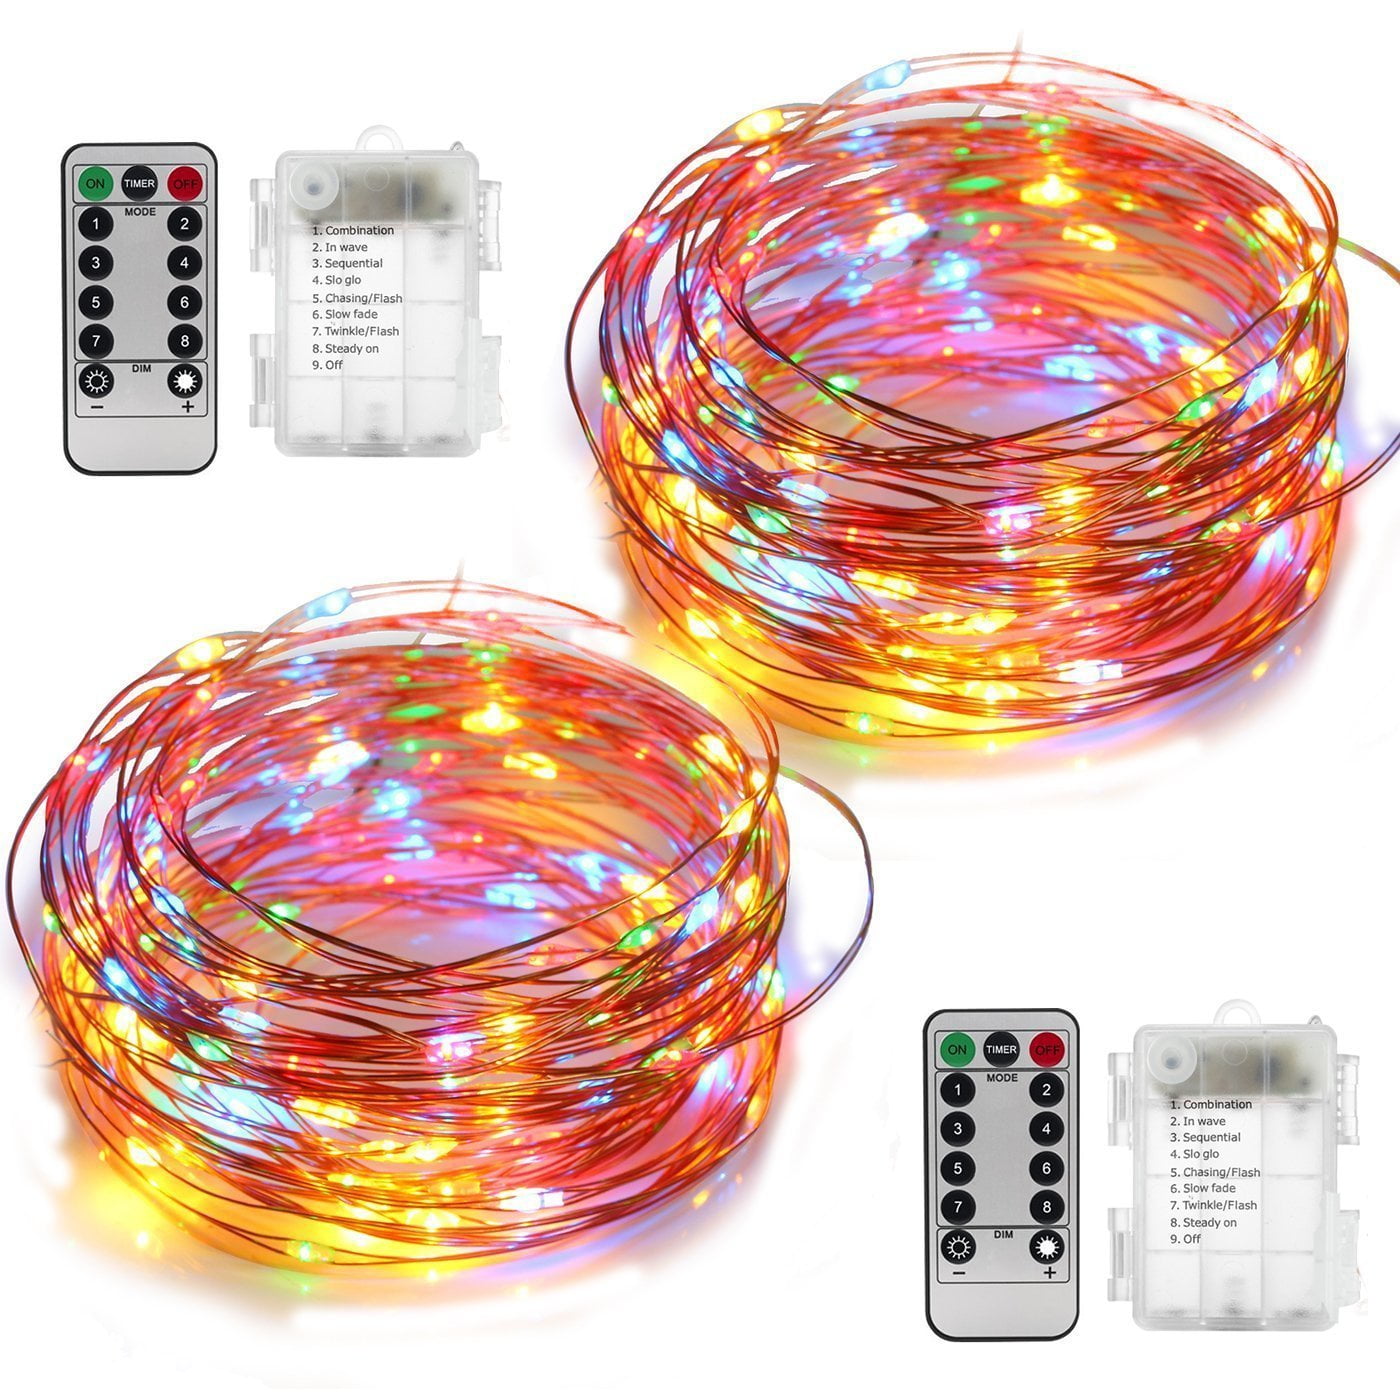 2 x Fairy String Lights Battery Operated Warm White Silver Wire 8 Mode Chains 16.5ft 50 LEDs Firefly String Lights with Remote Control for Bedroom Christmas Party Wedding Decoration